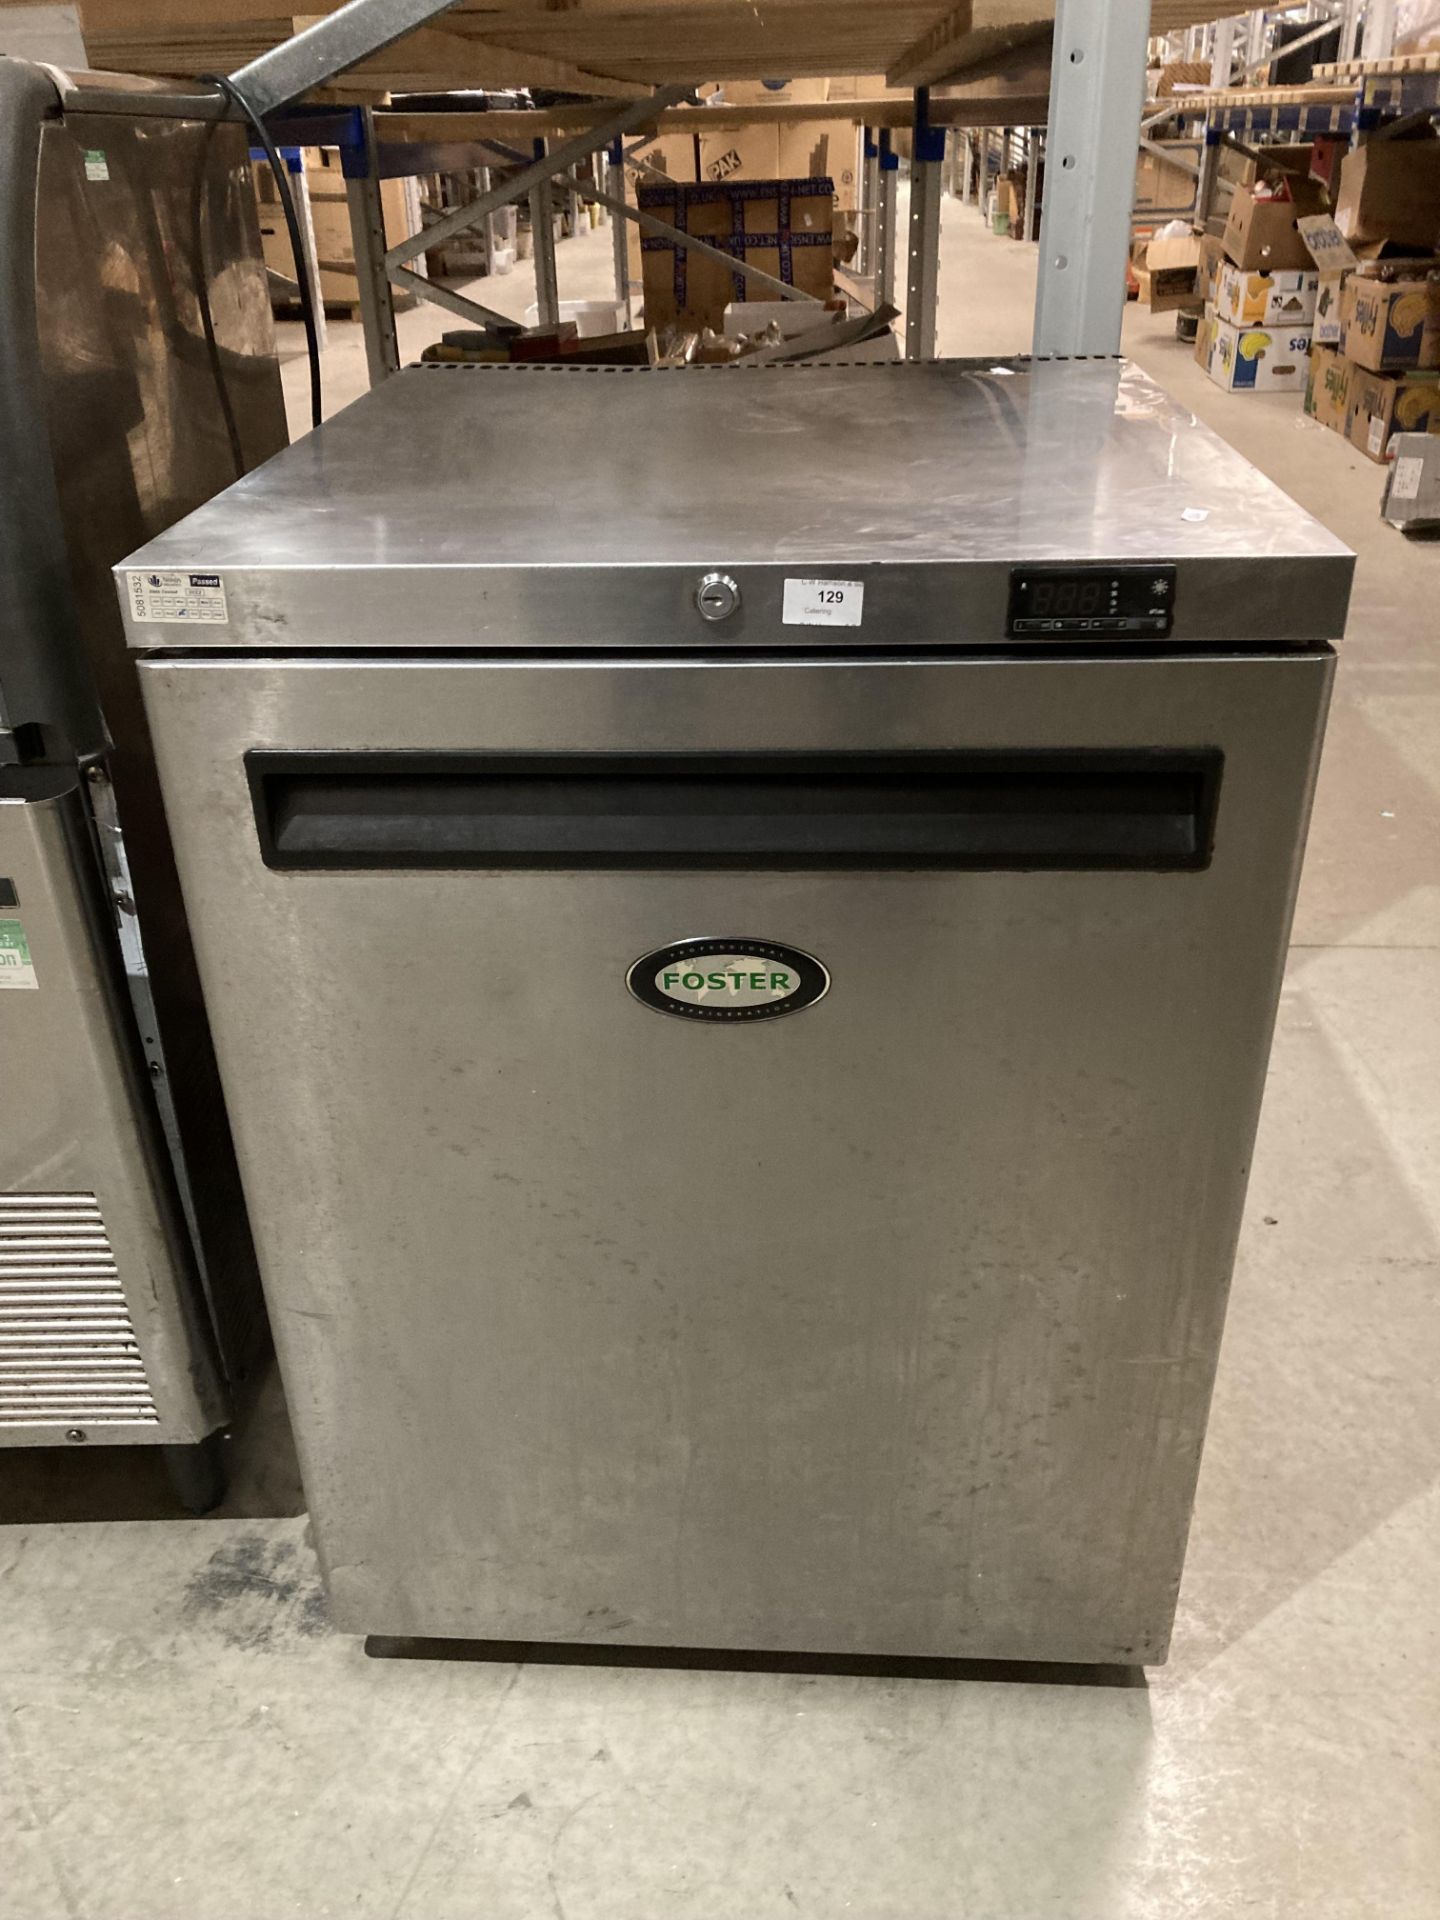 Foster stainless steel under counter fridge 240v (not run - loose cable,